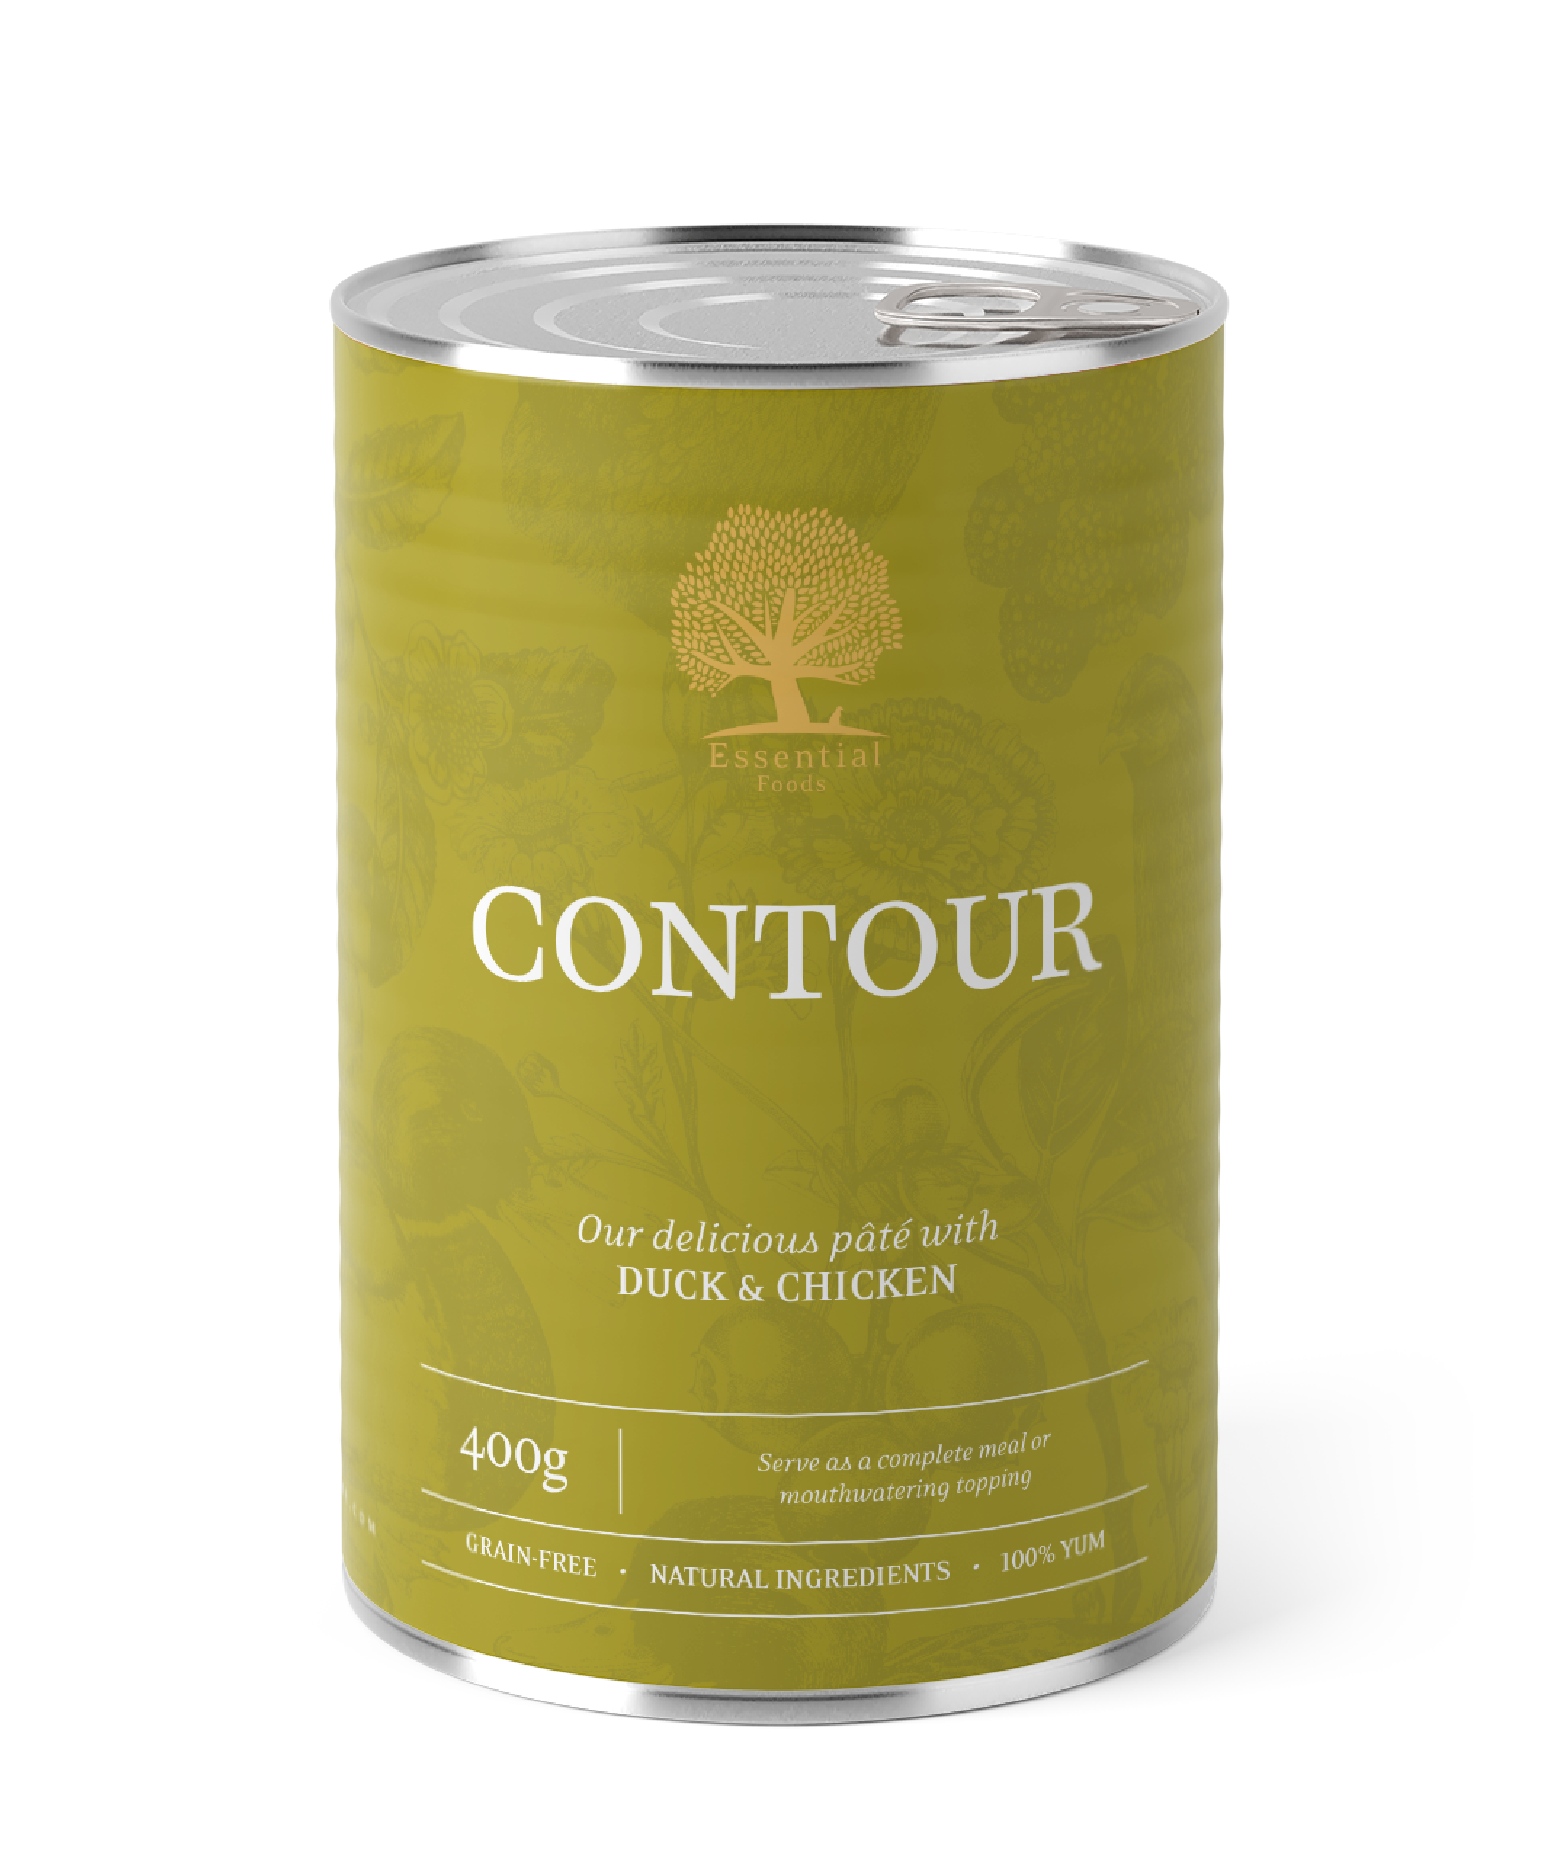 Afbeelding The Contour Pate – Blikvoeding Essential Foods